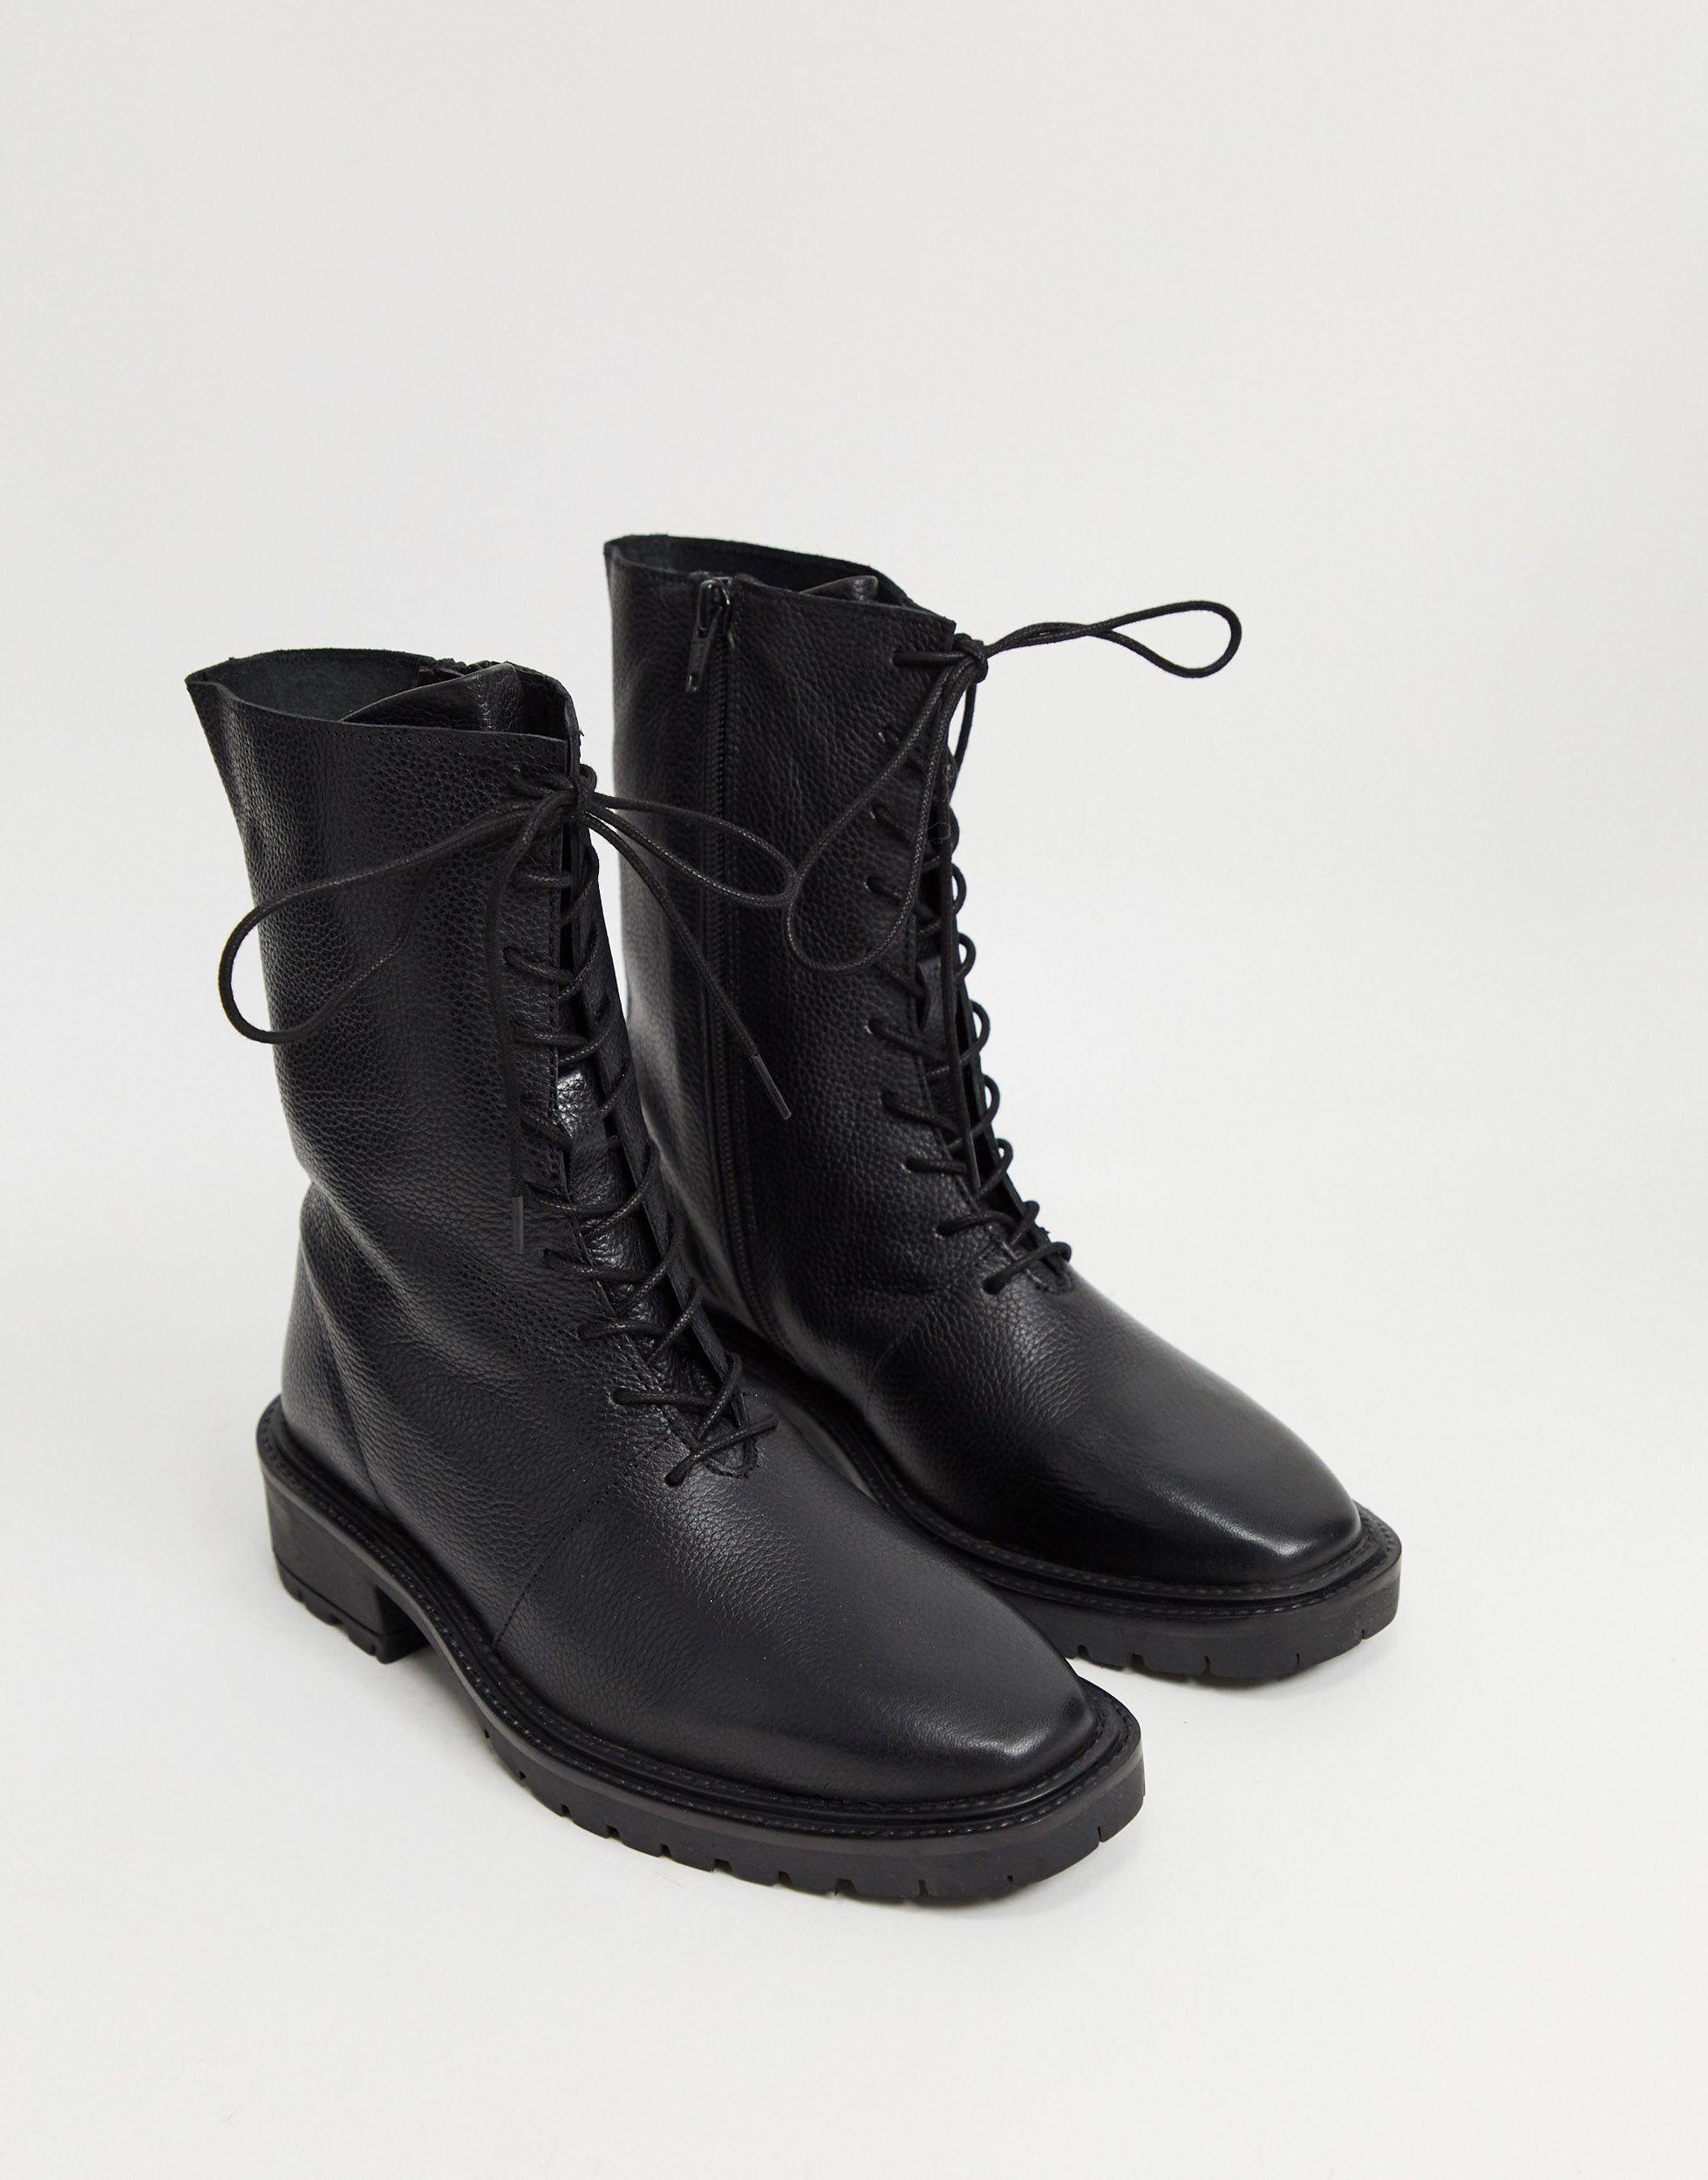 ASOS Alton Leather Lace Up Boots in Black - Lyst